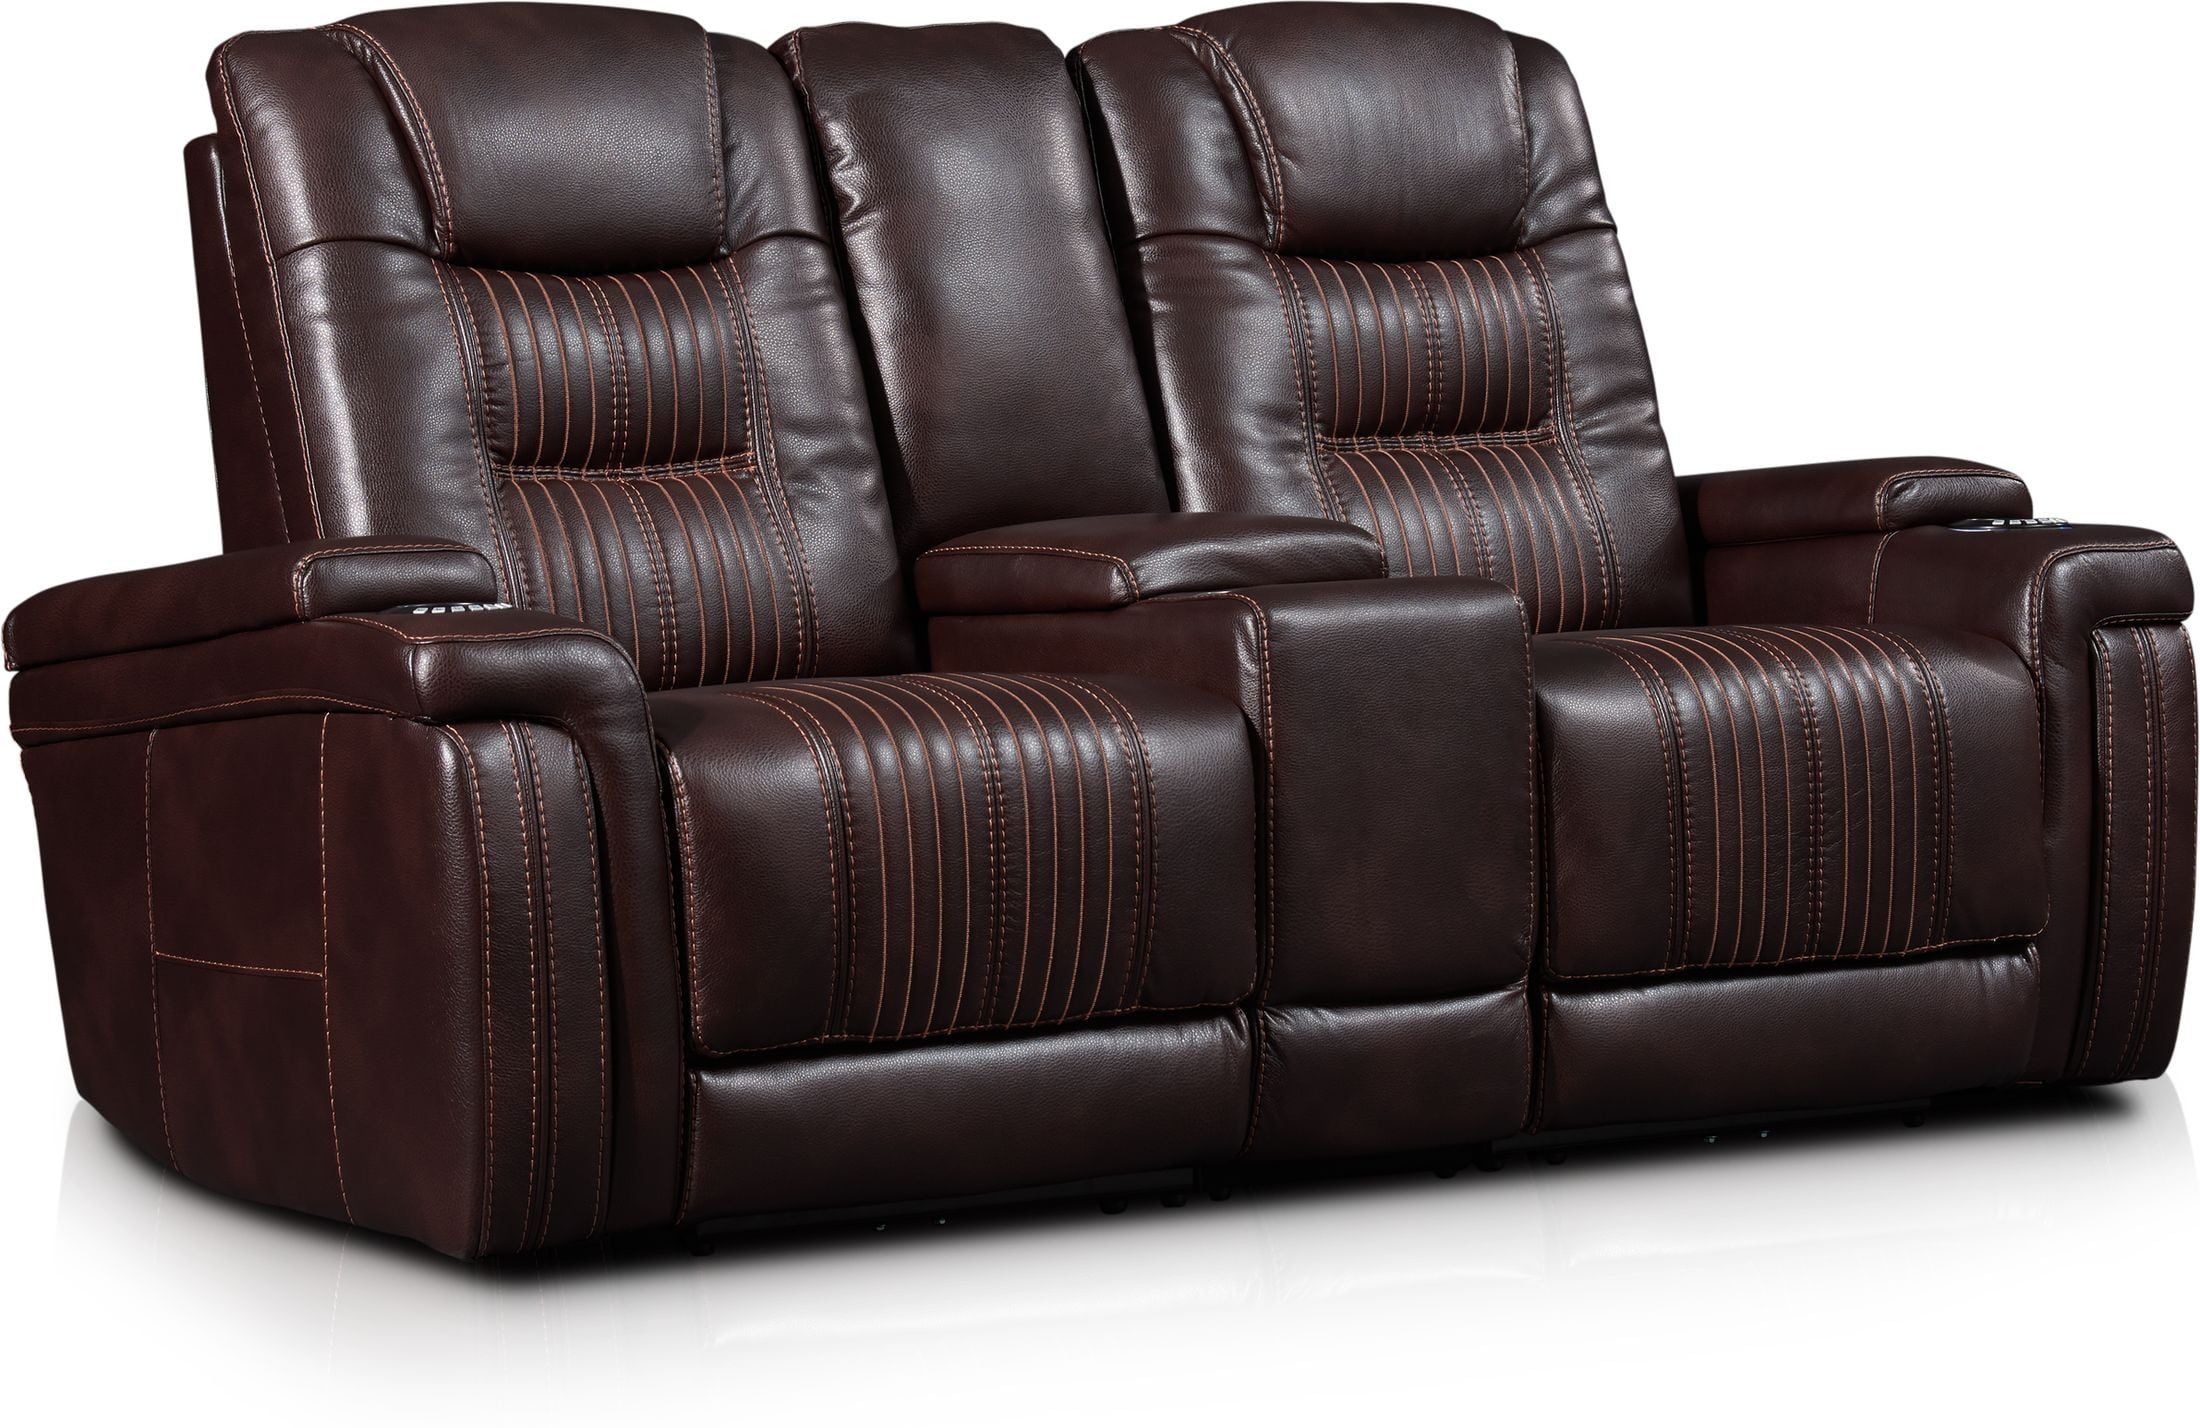 Magnus 3 Piece Triple Power Reclining Sofa With Console Intended For Charleston Triple Power Reclining Sofas (View 9 of 15)